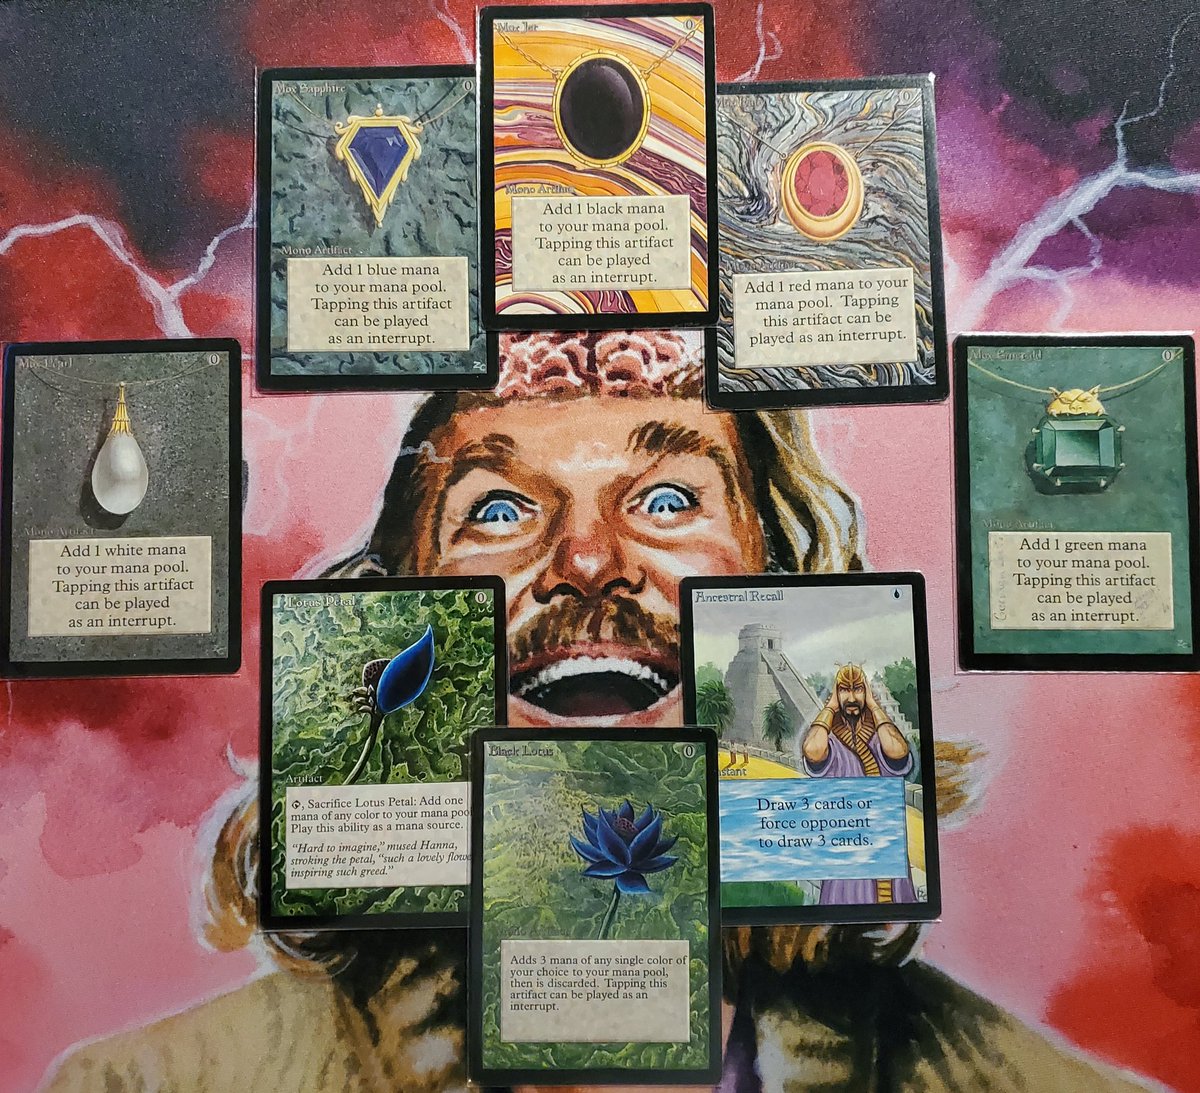 Be on the lookout for these coming to a NA #eternalweekend table near you! #MagicTheGathering #invintage #mtgunderground #thedude